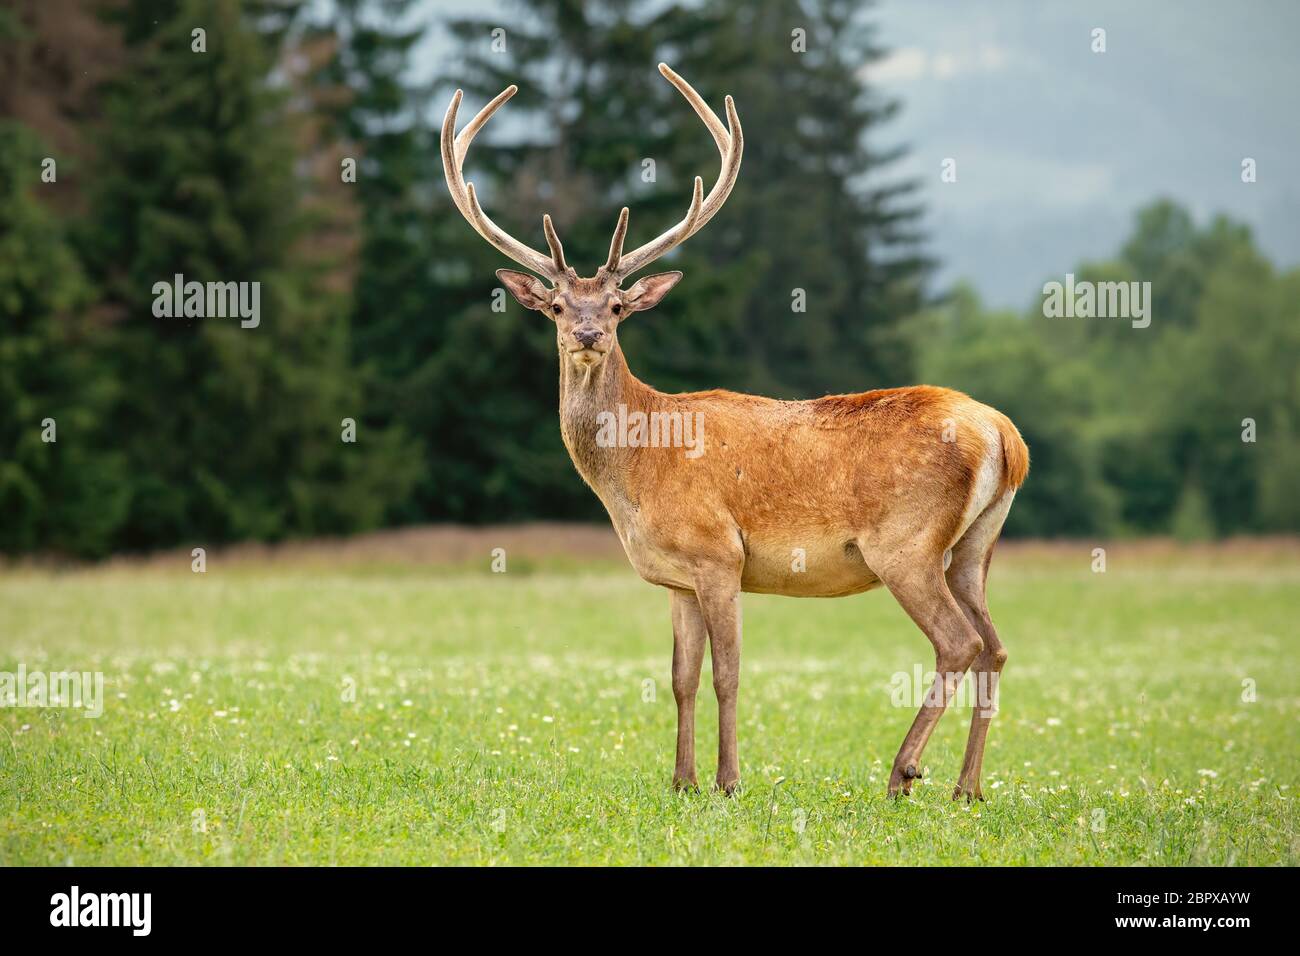 Red deer, cervus elaphus, stag with growing antlers covered in velvet standing on a meadow with short grass. Stock Photo